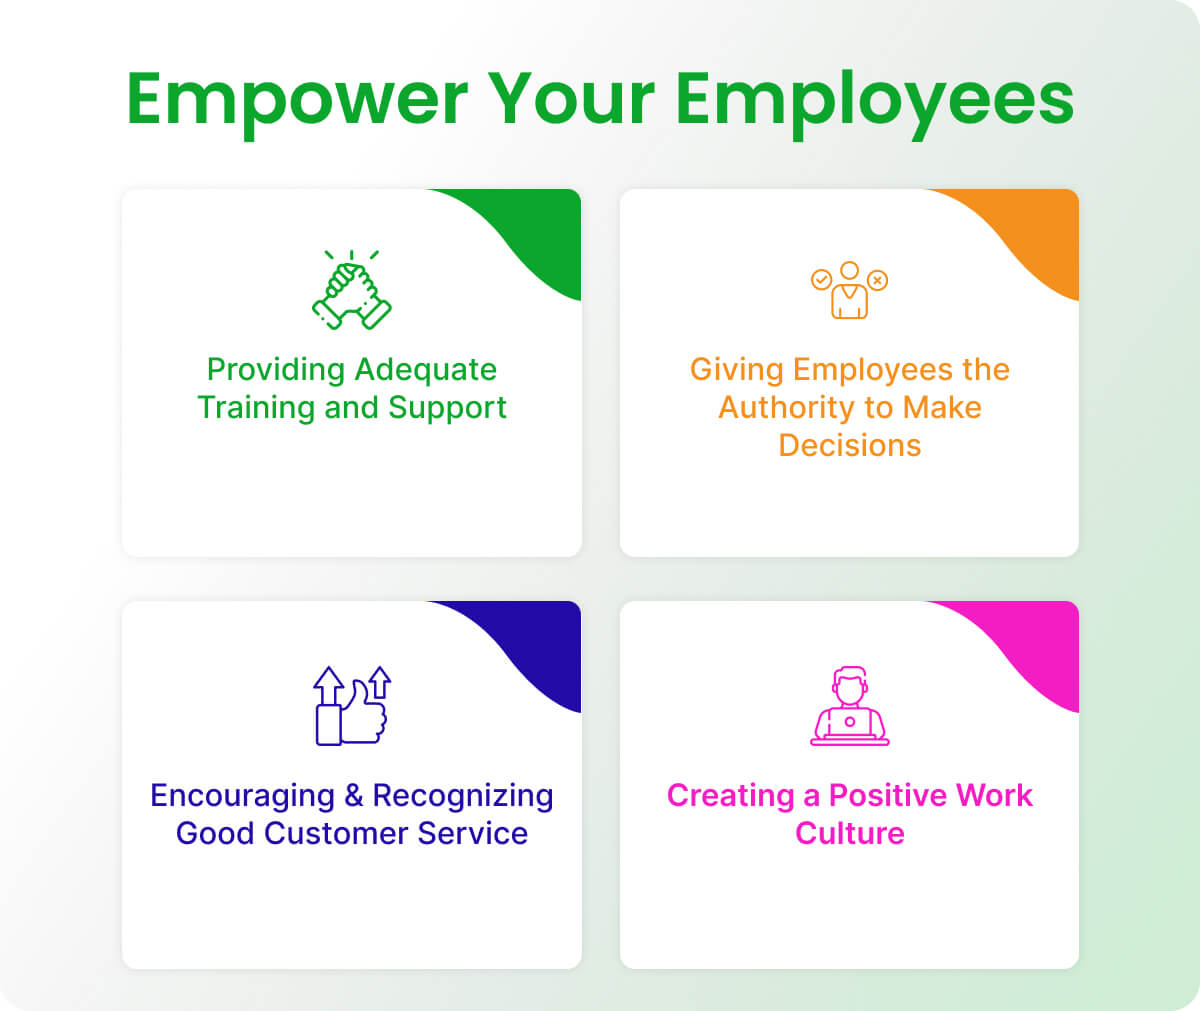 Empower Your Employees